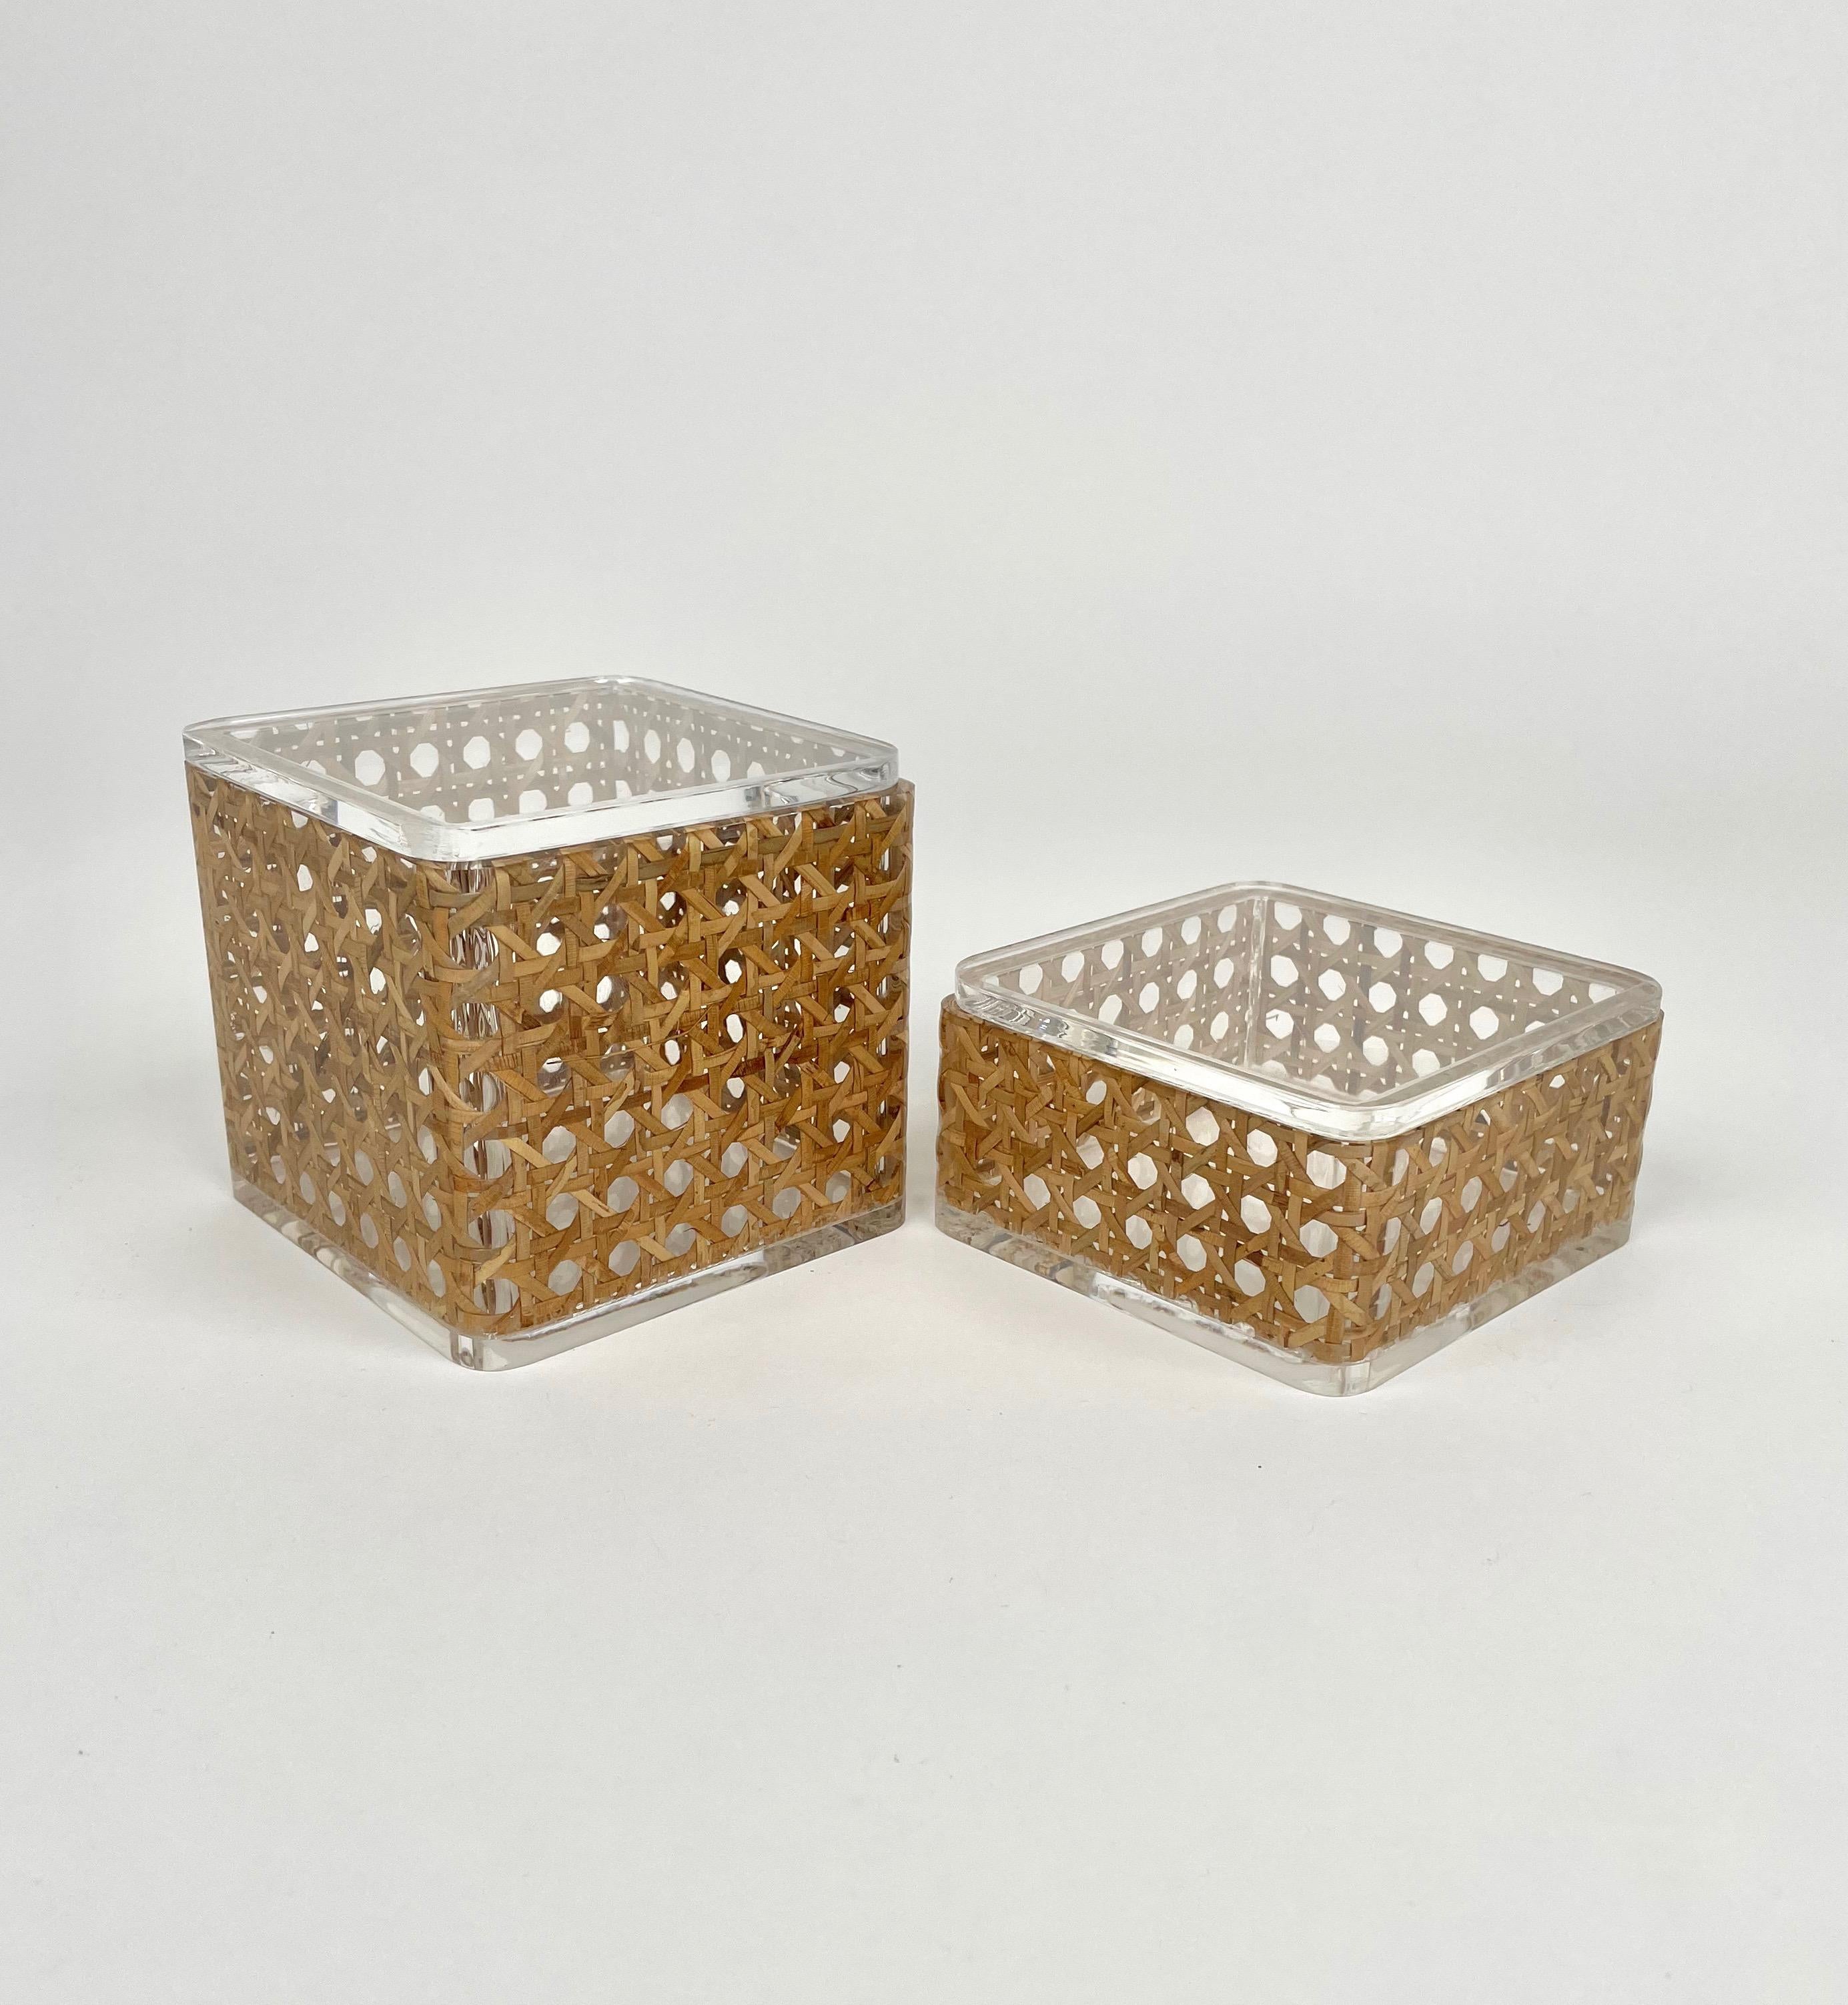 Pair of boxes in lucite and rattan in the style of Christian Dior Home. Made in Italy in the 1970s. 

The boxes come in different dimensions:
- Big box: 9.5 cm height x 10.5 cm diameter.
- Small box: 5.5 cm height x 10.5 cm diameter.